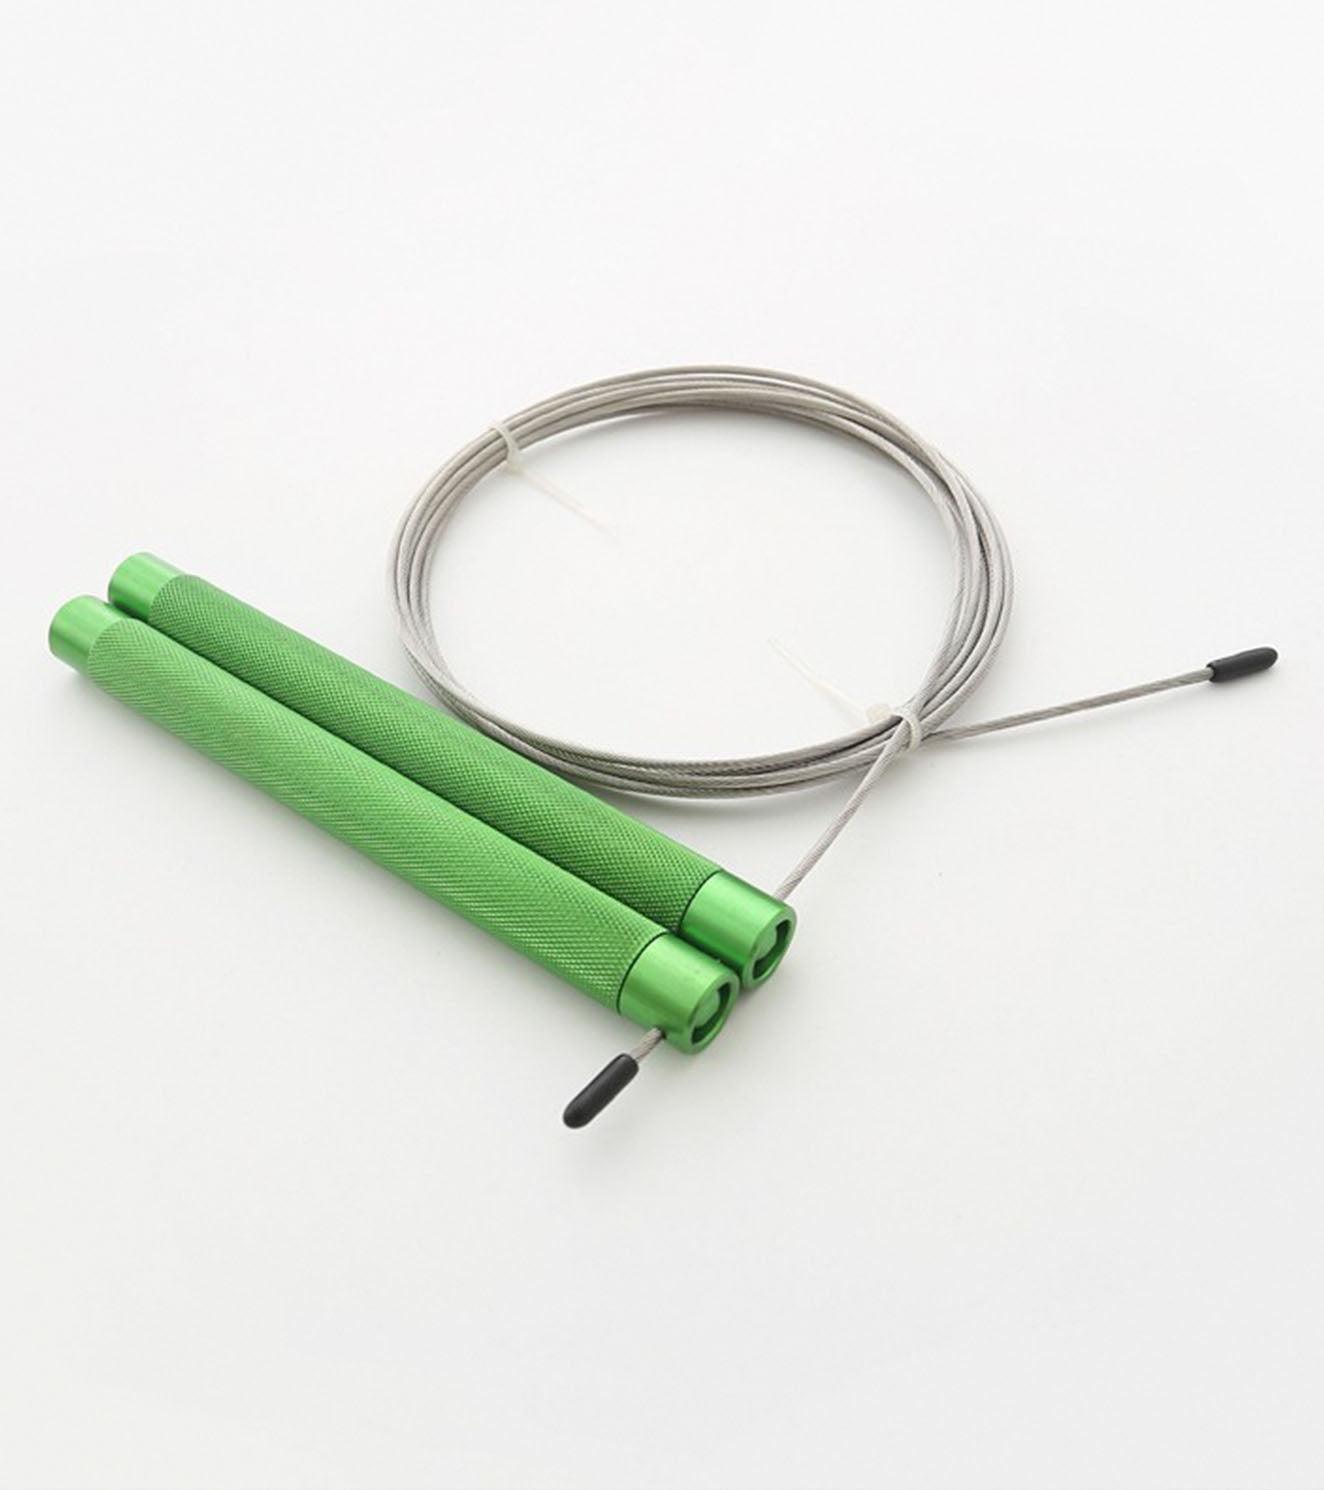 Competition speed rope - wodarmour